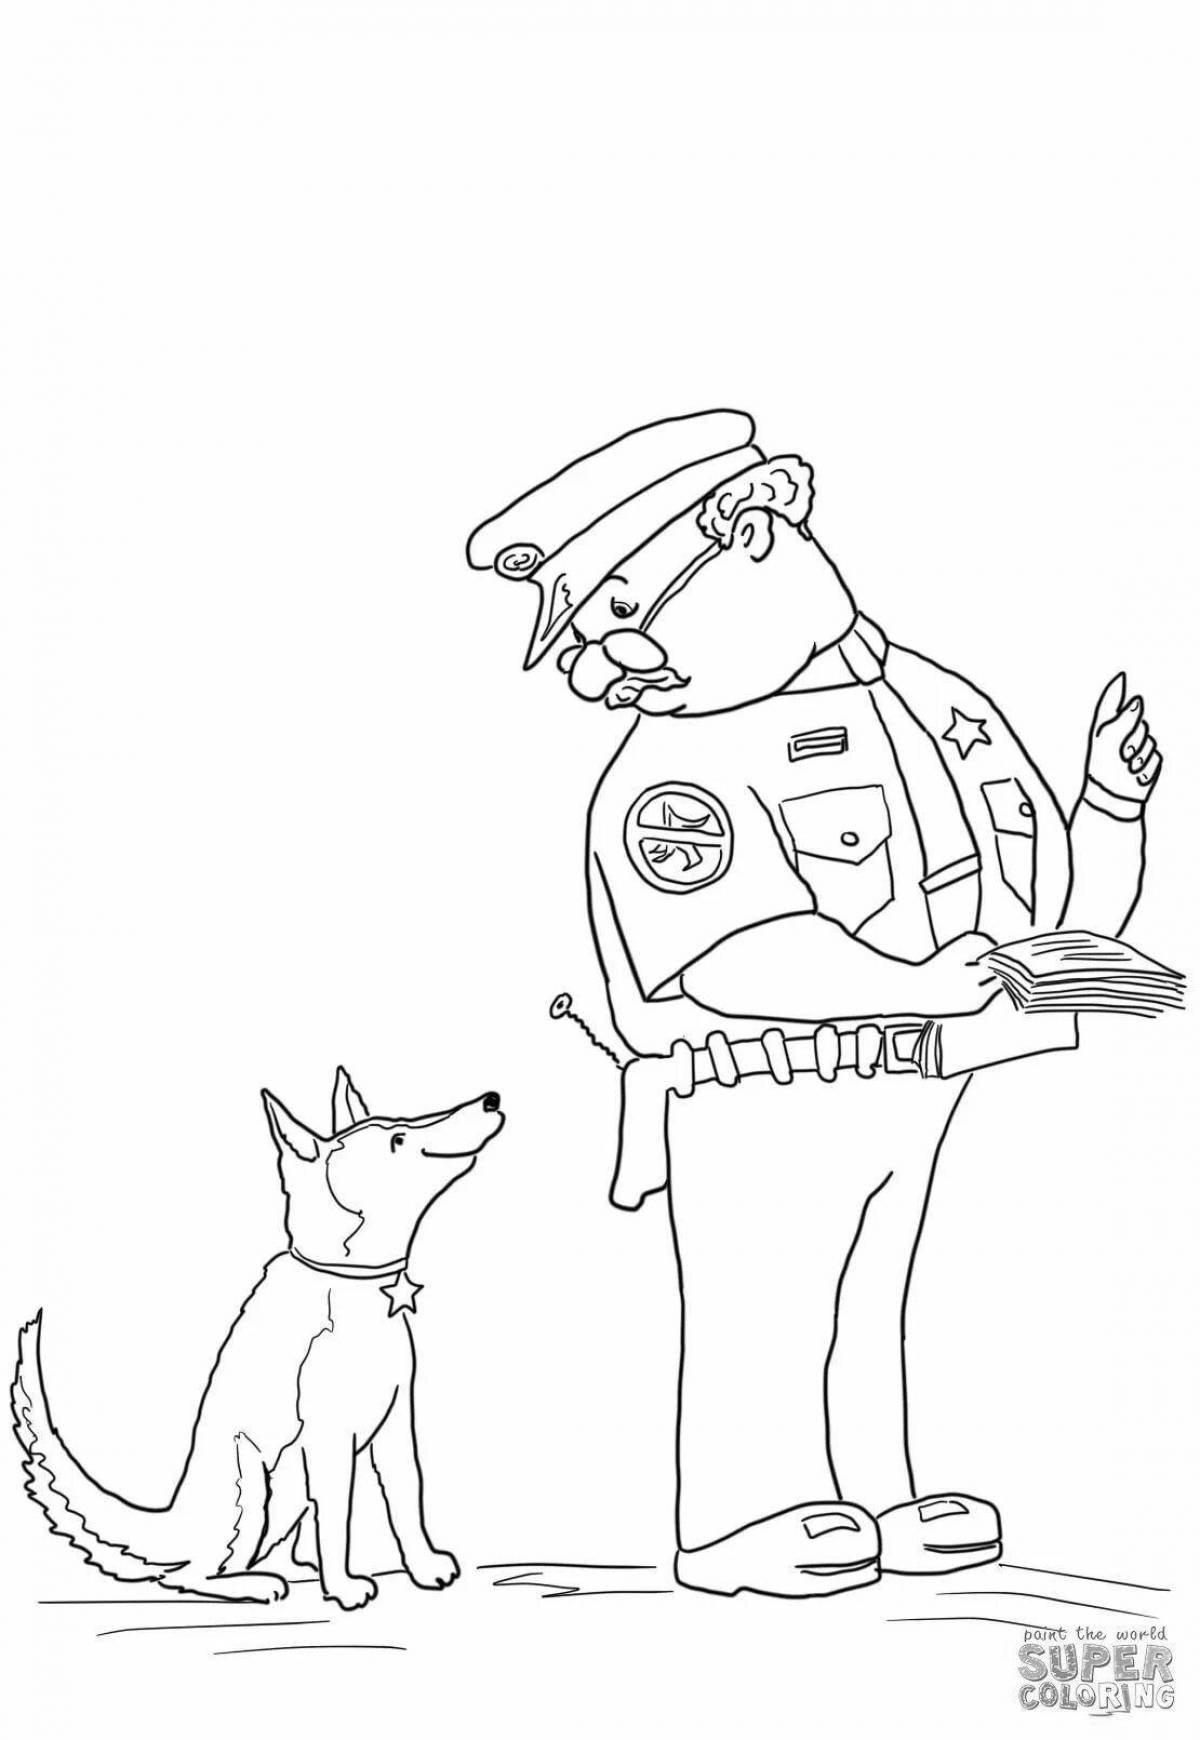 Coloring page joyful officer